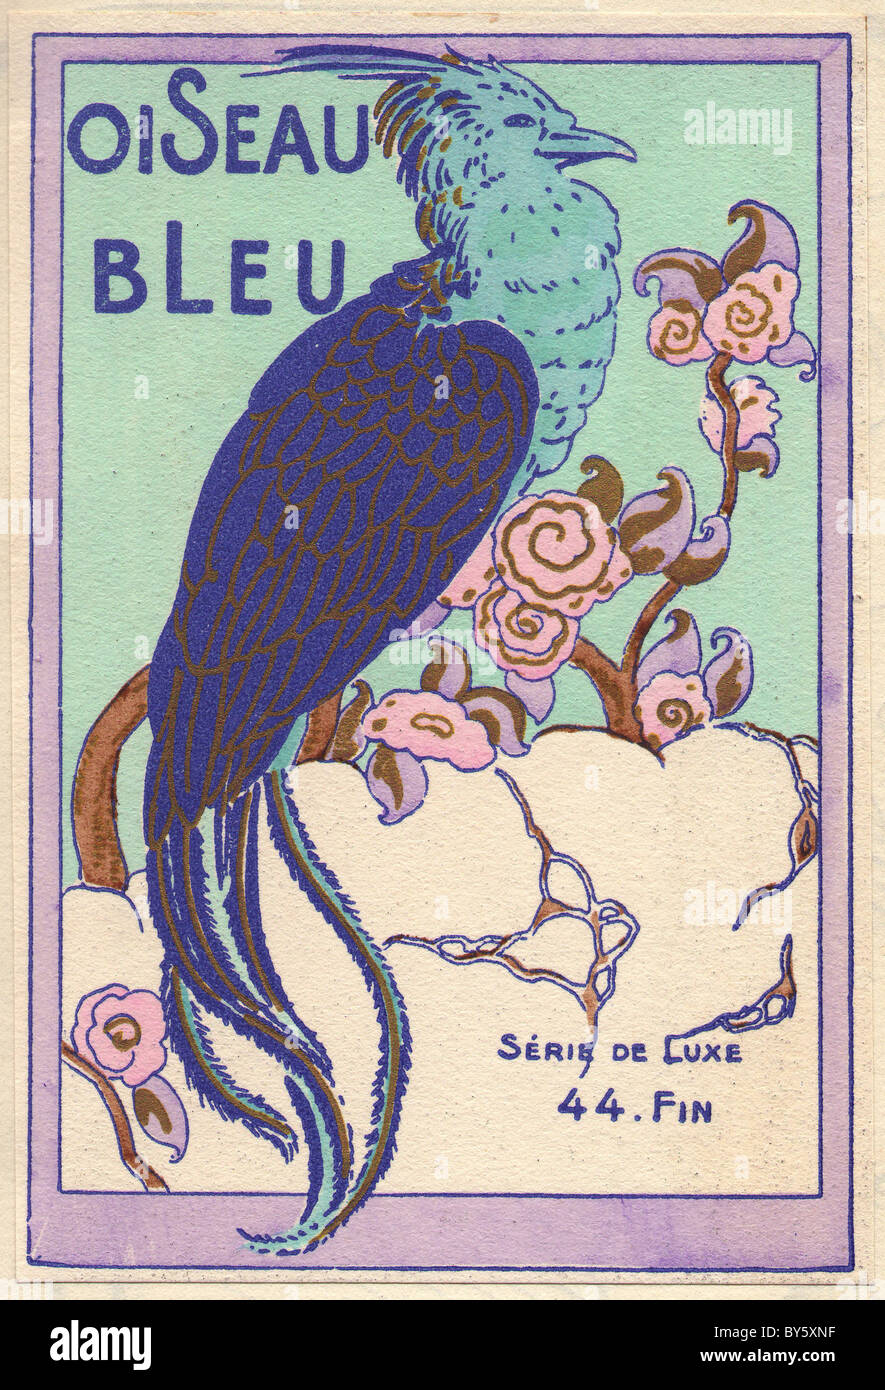 1920s art deco advertisement for Blue Bird, showing a blue bird on a flowering tree against a turquoise background. Stock Photo